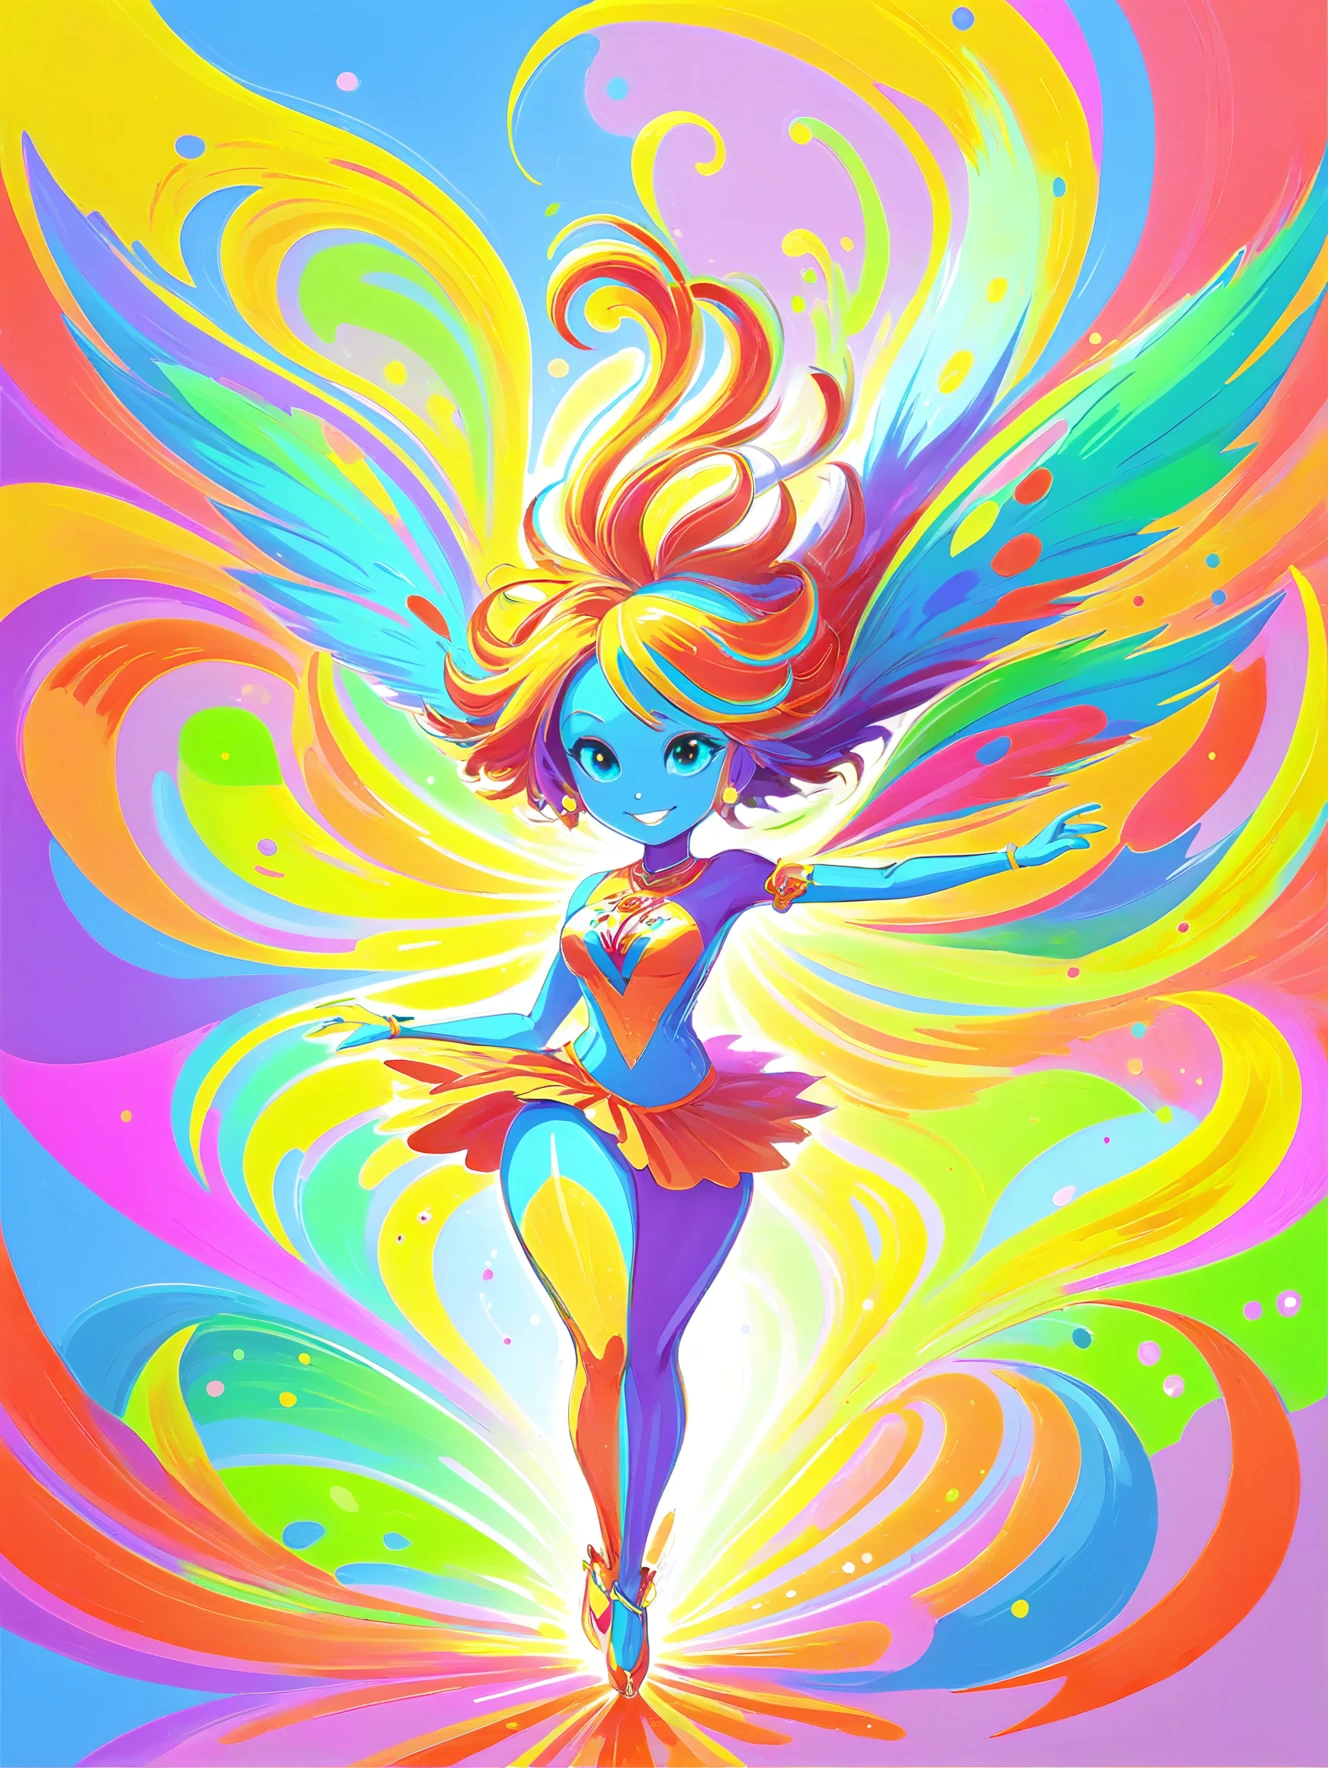 A lively joy spirit, radiating with bright colors, spreading happiness wherever it goes.